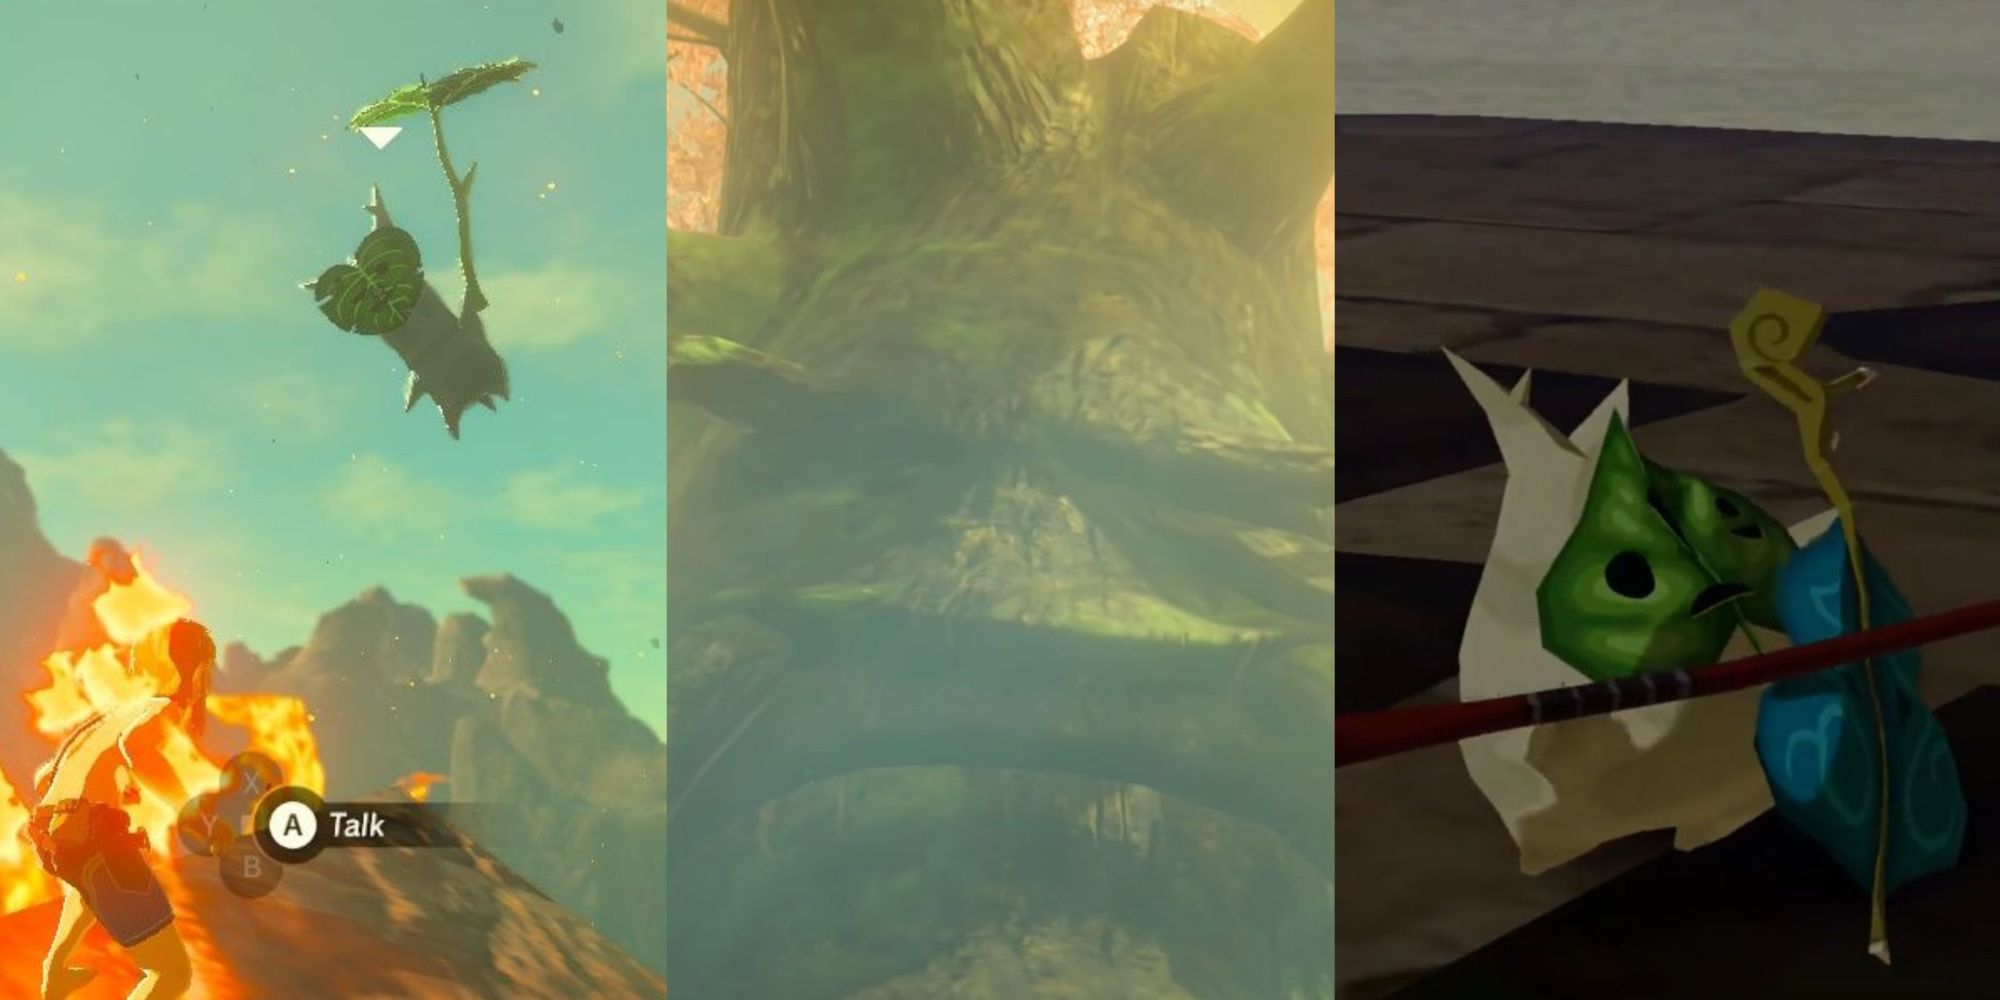 A collage showing a Korok flying while Links is on fire, the Korok tree, and a Korok playing an instrument.